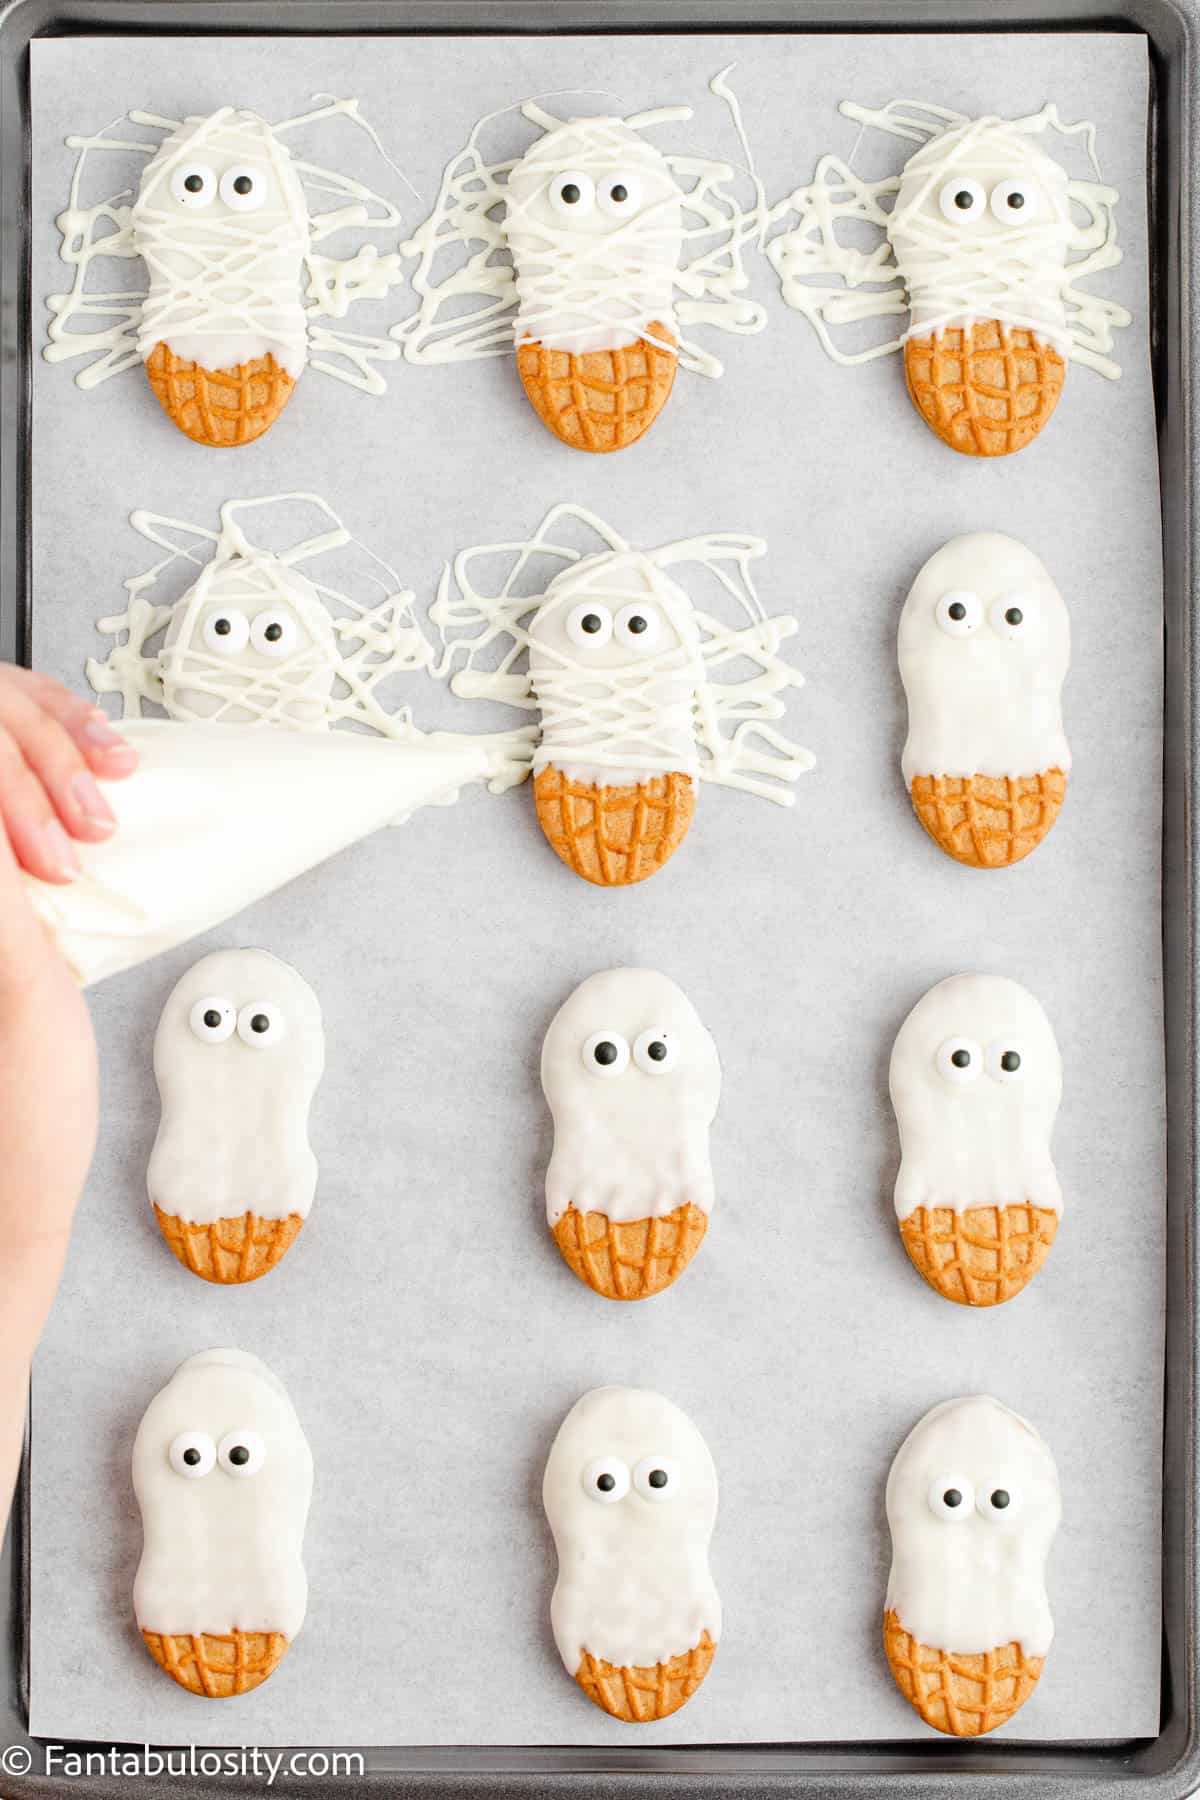 A tray of Nutter Butter Mummies cookies are displayed and a hand is drizzling melted white chocolate on the cookies for the mummy bandages